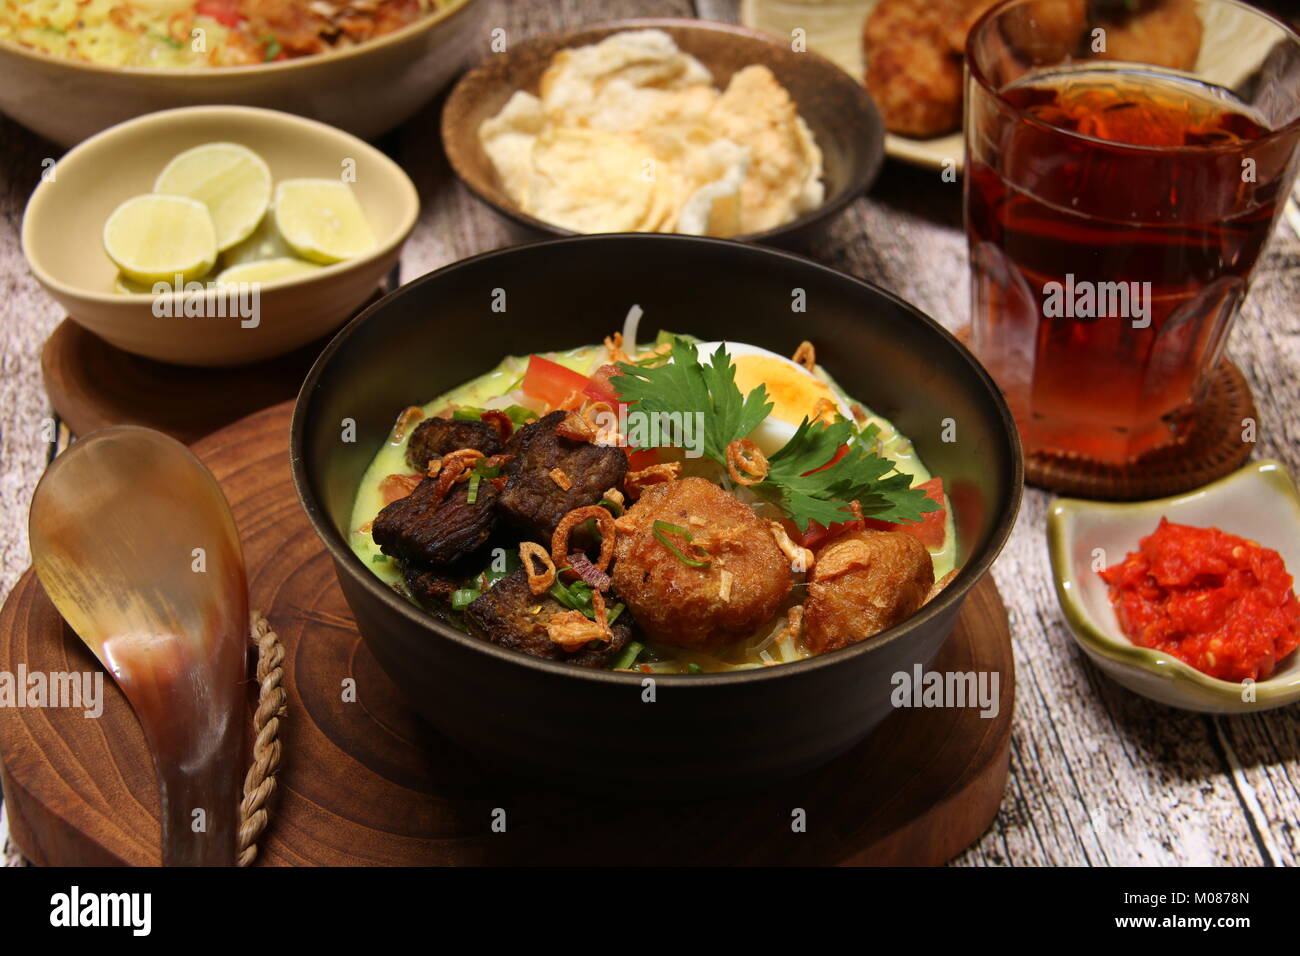 Soto Medan, the Beef and Coconut Milk Soup from Medan, North Sumatra Stock Photo